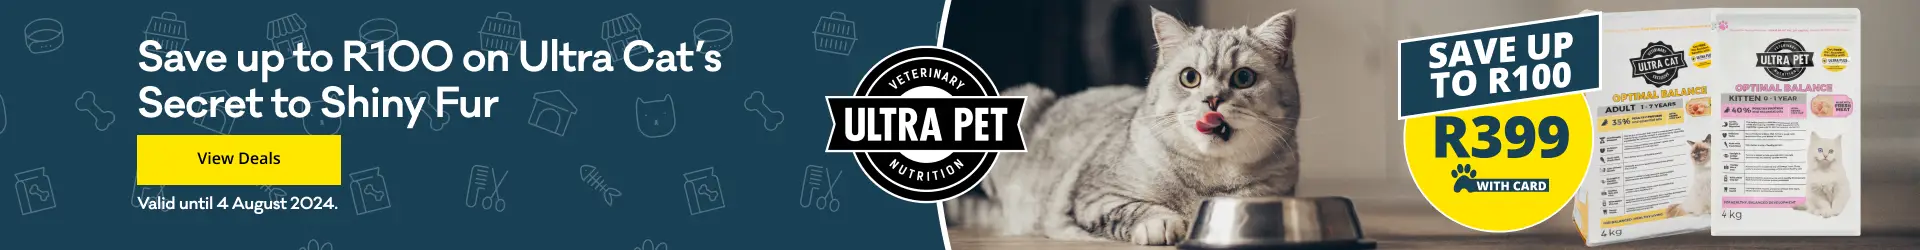 Save up to R100 on Ultra Cat’s secret to shiny fur, Ultra Cat Cat Food. Only R399 at Petshop Science. Click to view deals.